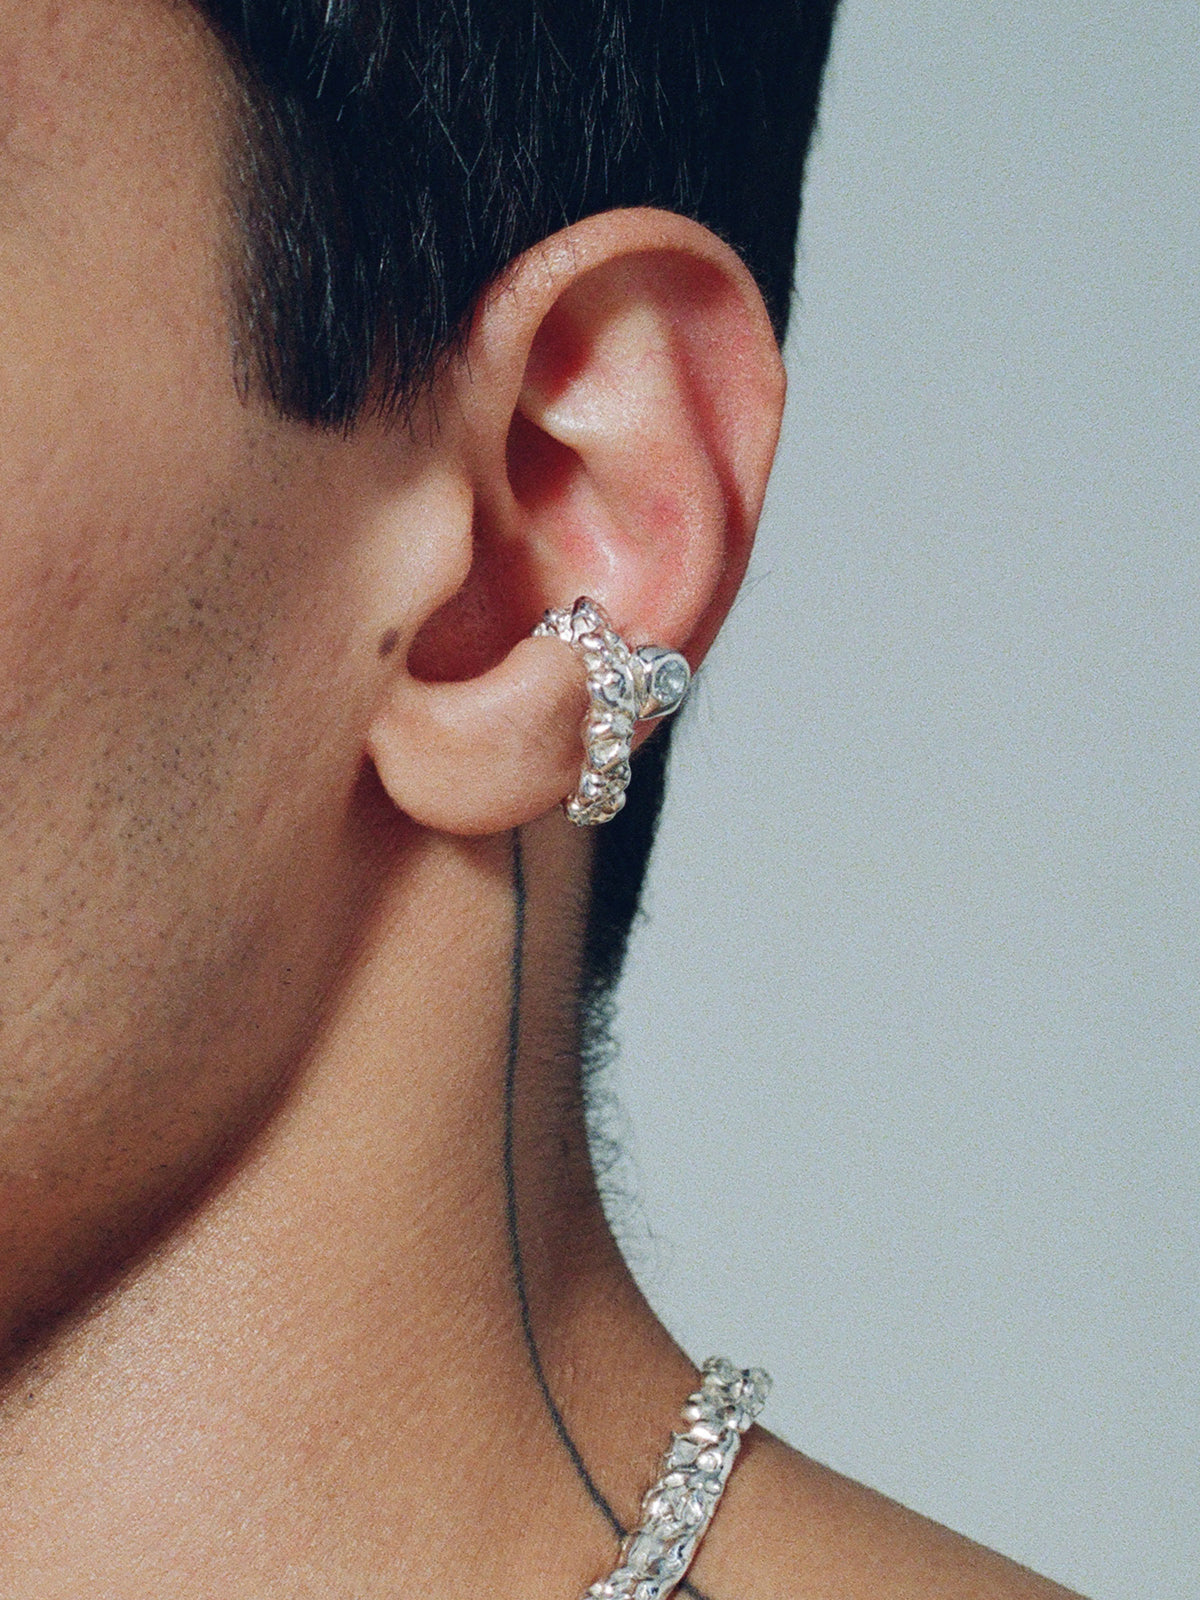 FARIS ROCA GEM Ear Cuff in sterling silver with topaz worn on male model. Styled with BRUTO Collar in sterling silver